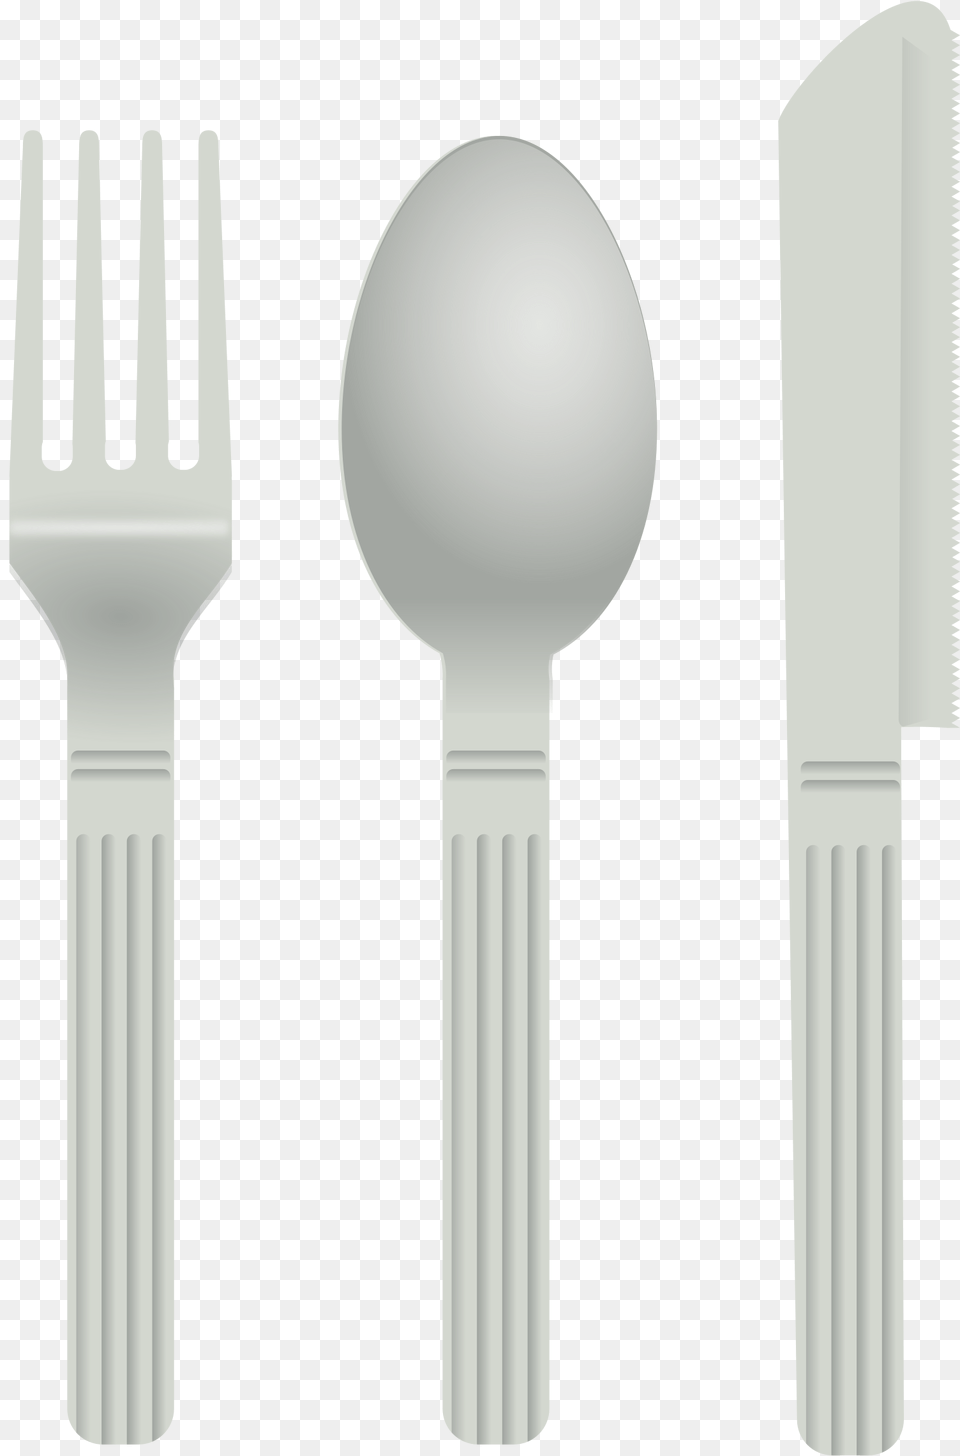 Fork And Spoon Clip Arts Spoon Clip Art, Cutlery Png